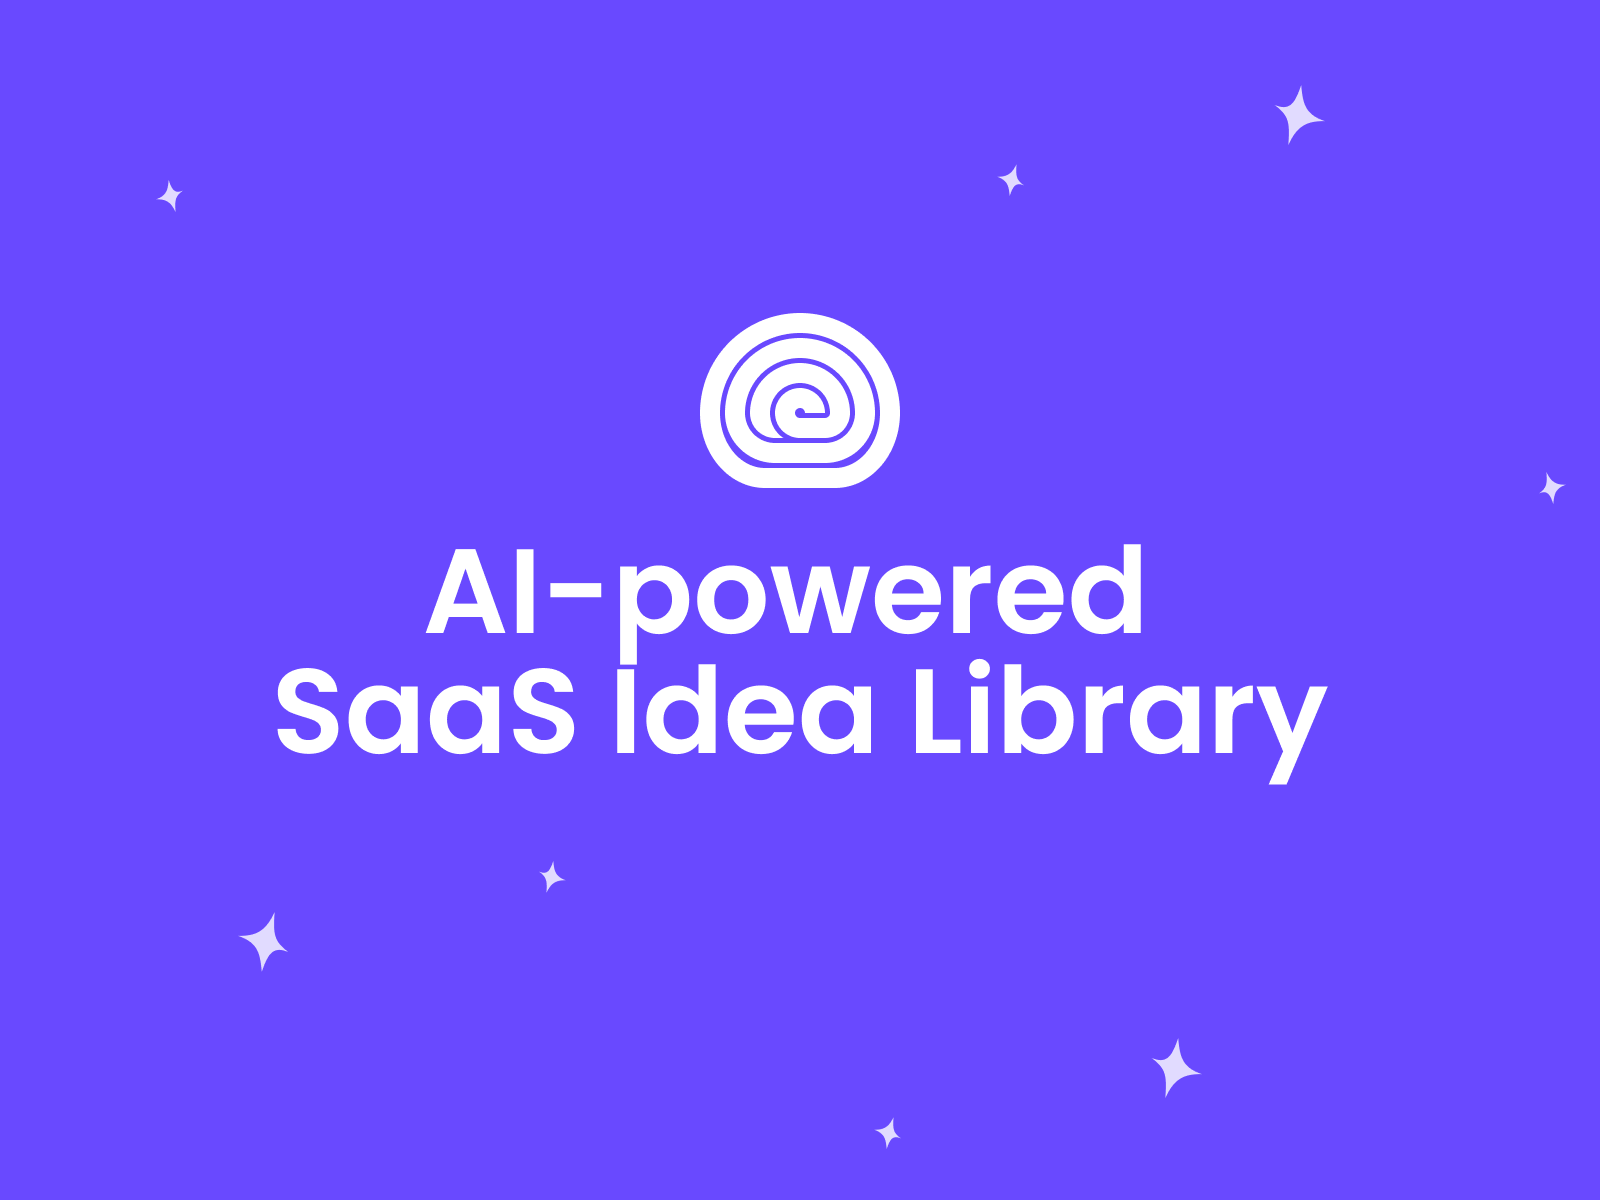 SaaS Library - Discover 100+ unique SaaS ideas that can be built with AI